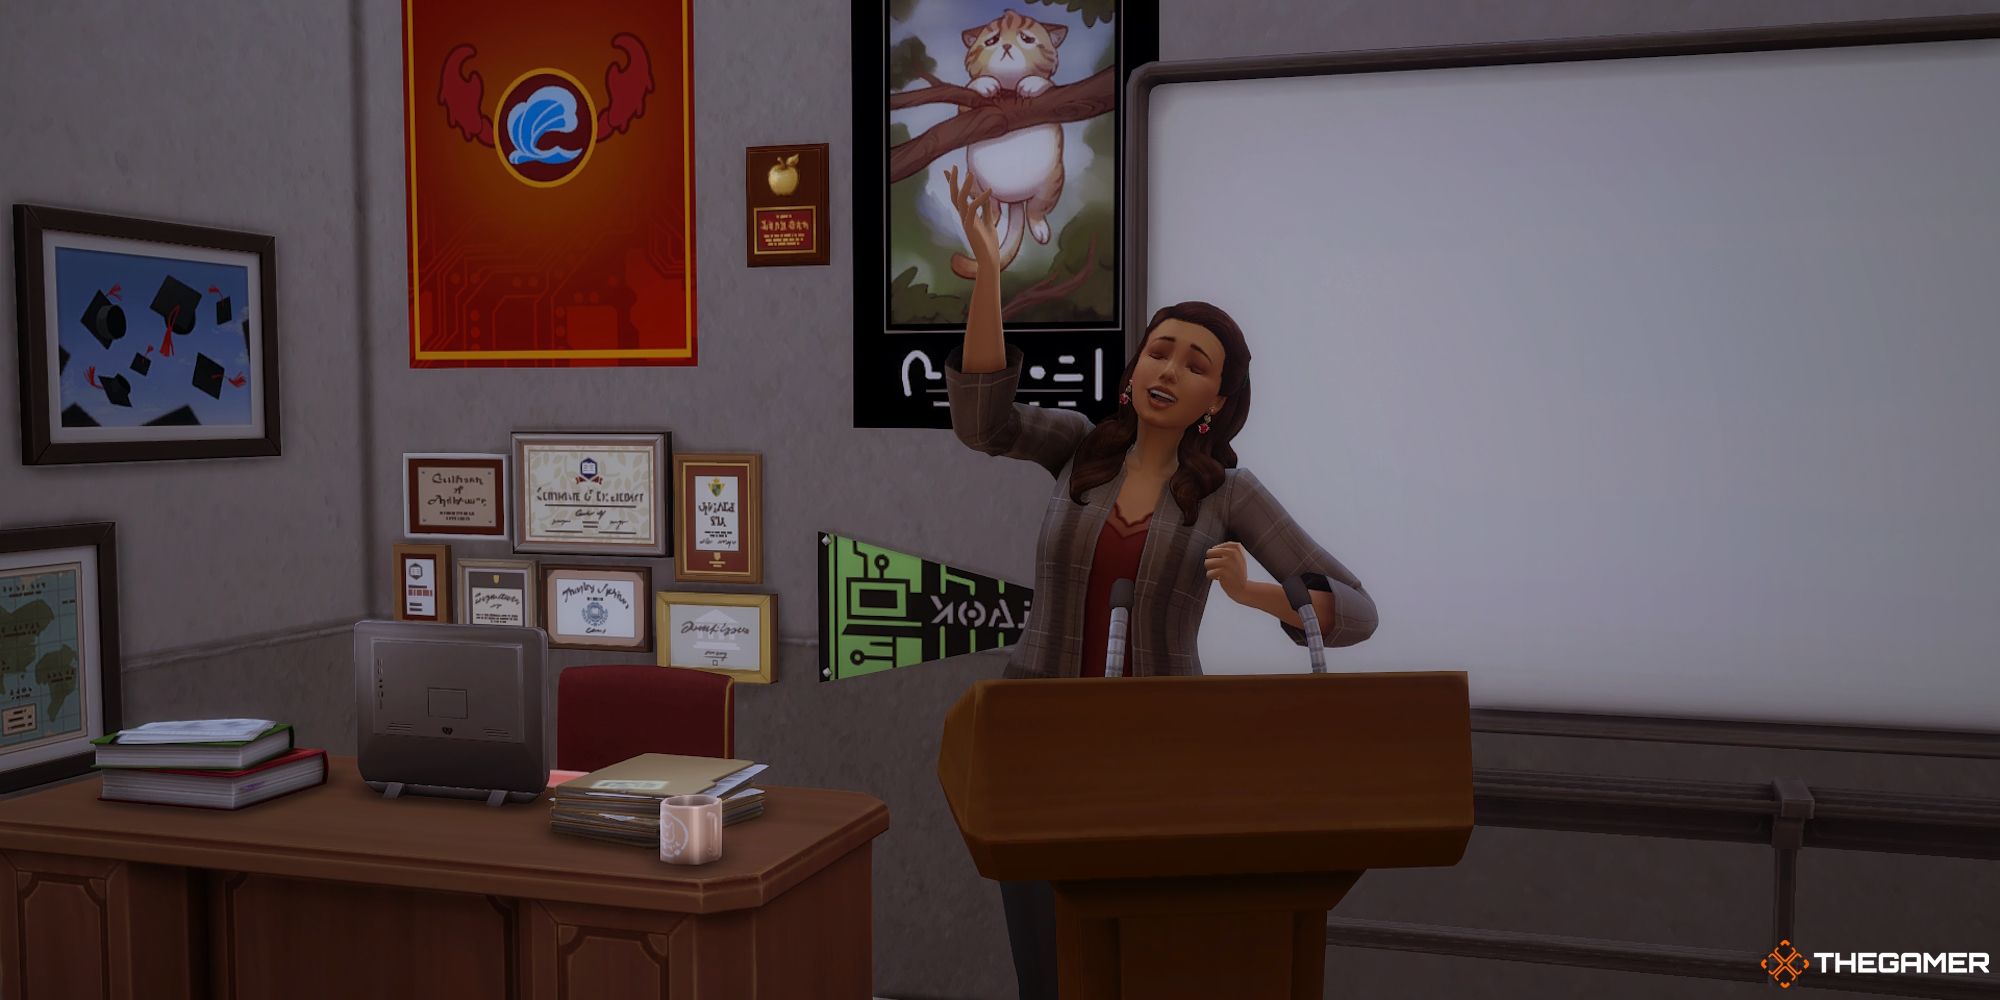 A Sim in the Education career teaches a class in The Sims 4